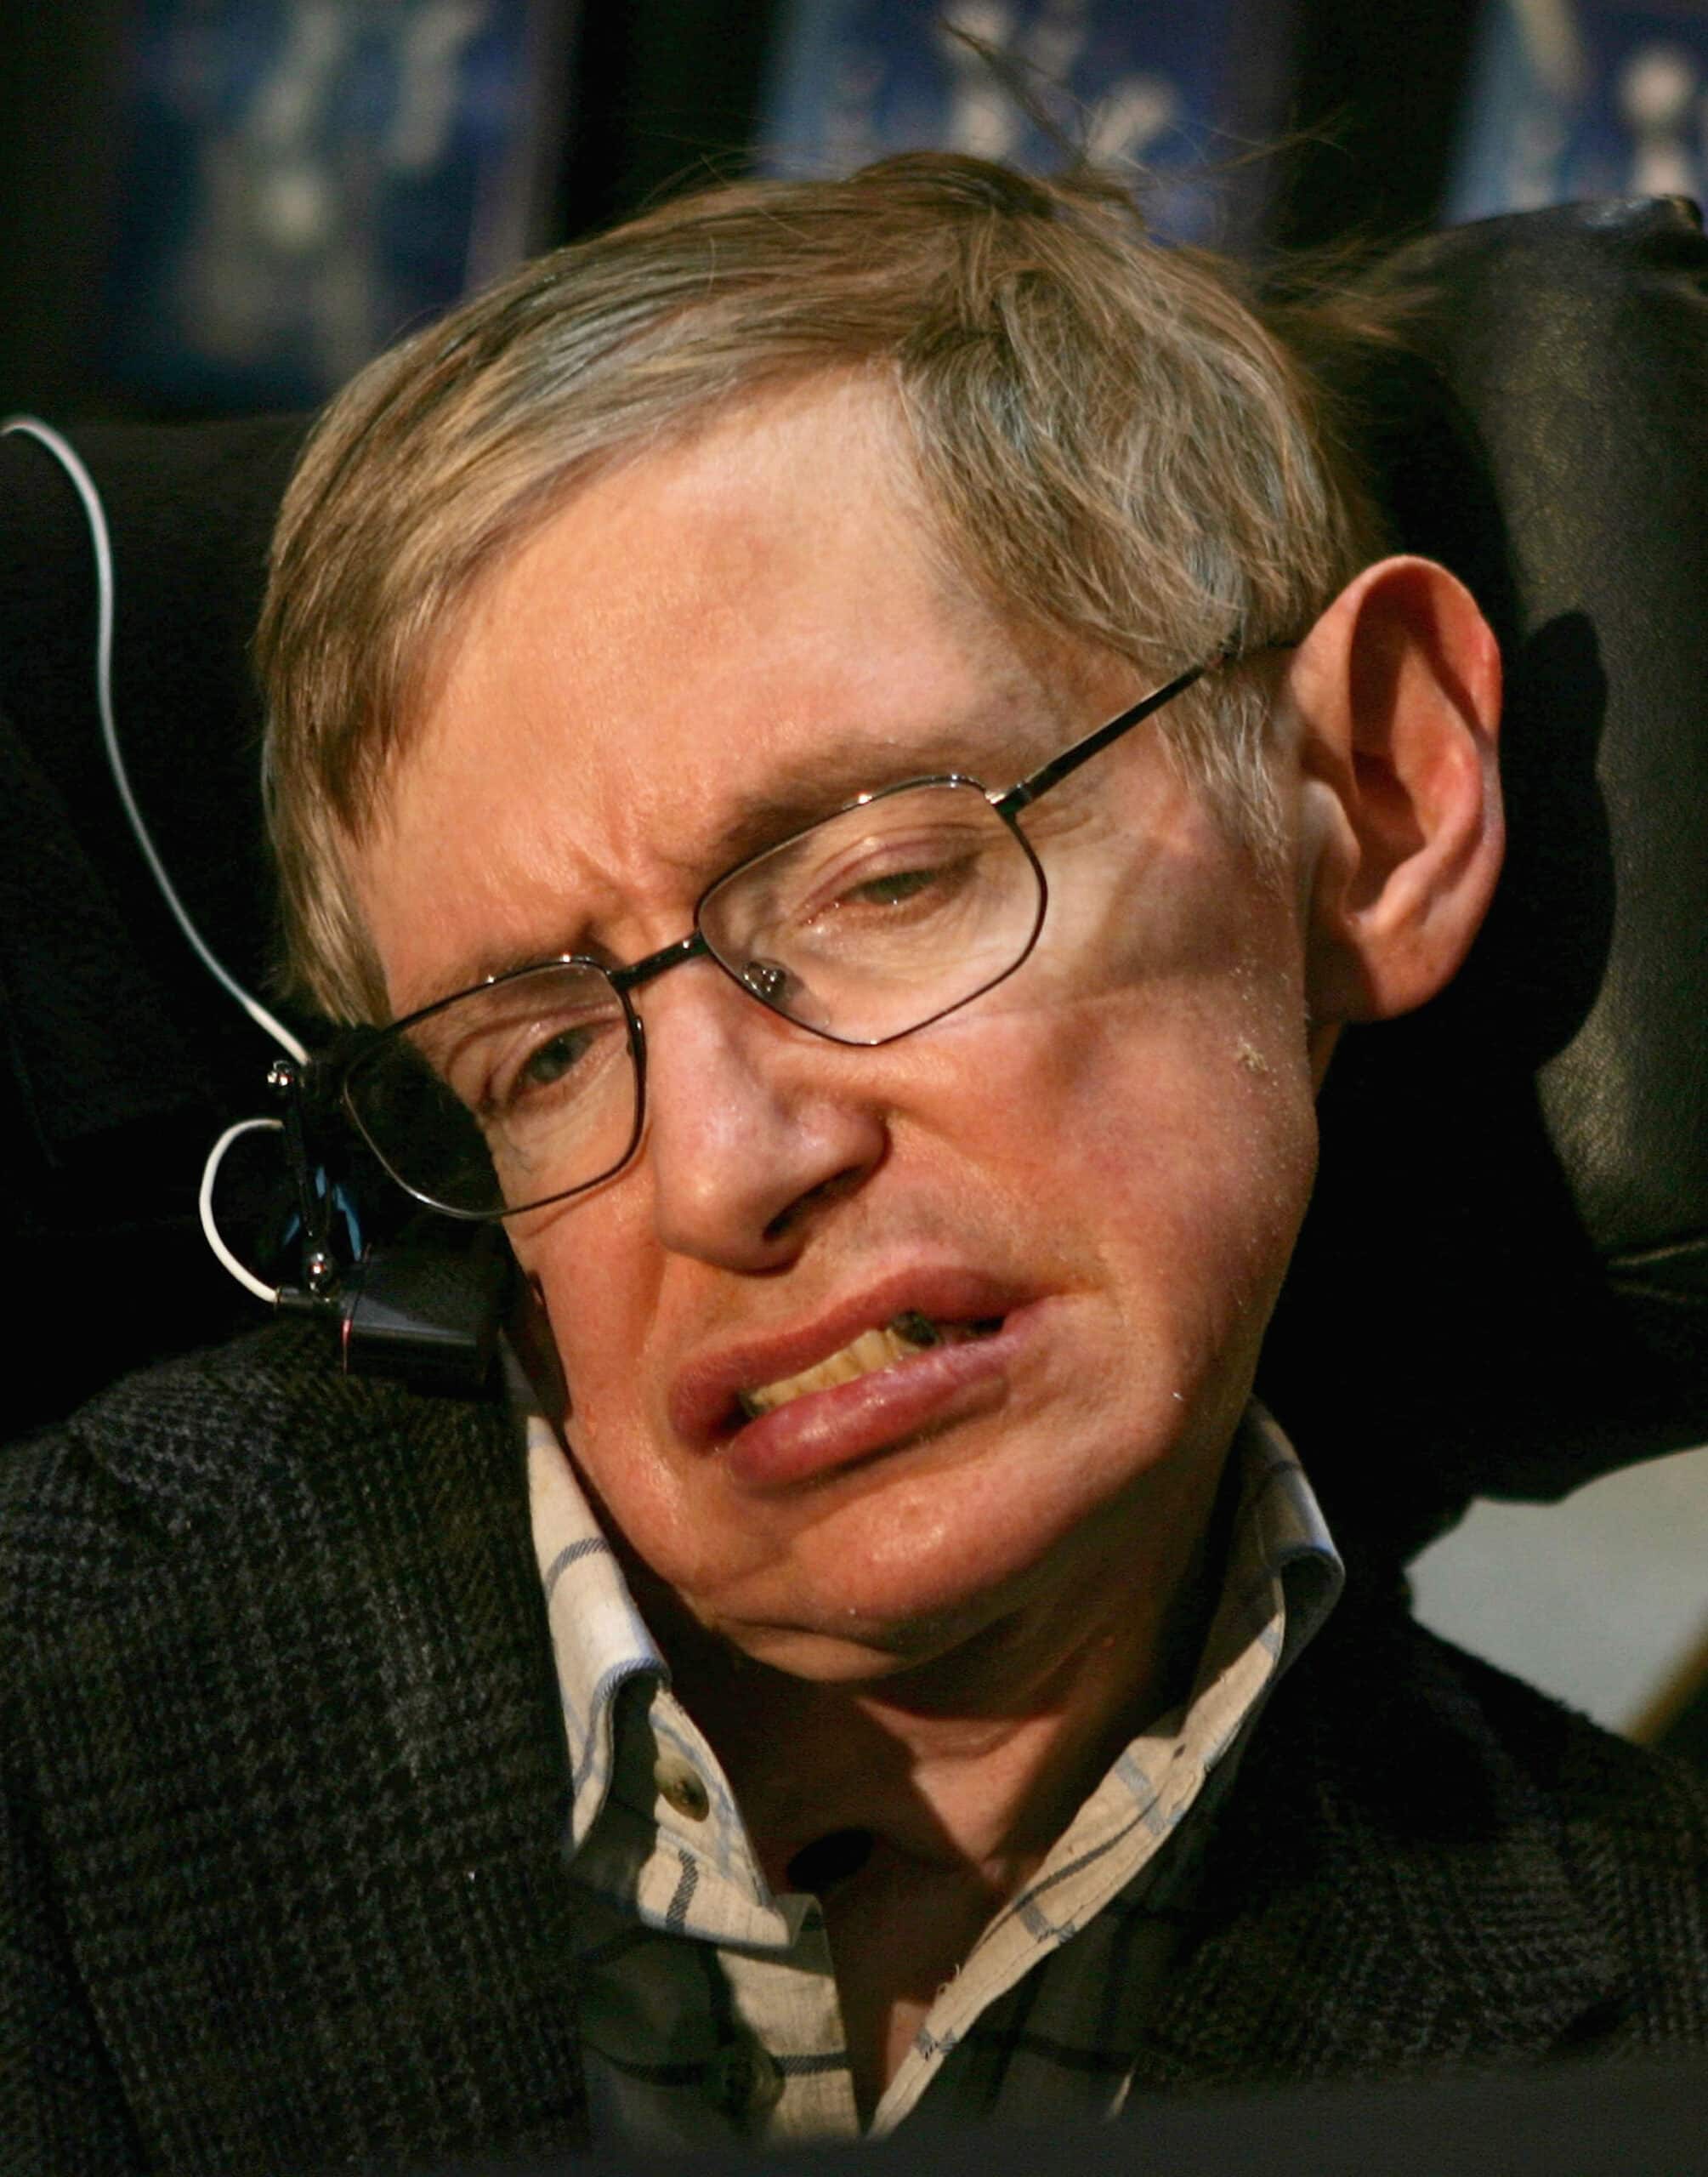 <p>There is no disputing how incredibly savvy Stephen Hawking was. His goal with his time on earth was powerfully succinct. He once stated,<strong> “My goal is simple. It is a complete understanding of the universe, why it is as it is and why it exists at all.</strong></p><p><span>Would you please let us know what you think about our content? <p>Agree? Tell us by clicking the “Thumbs Up” button above.</p> Disagree? Leave a comment telling us what you’d change.</span></p>